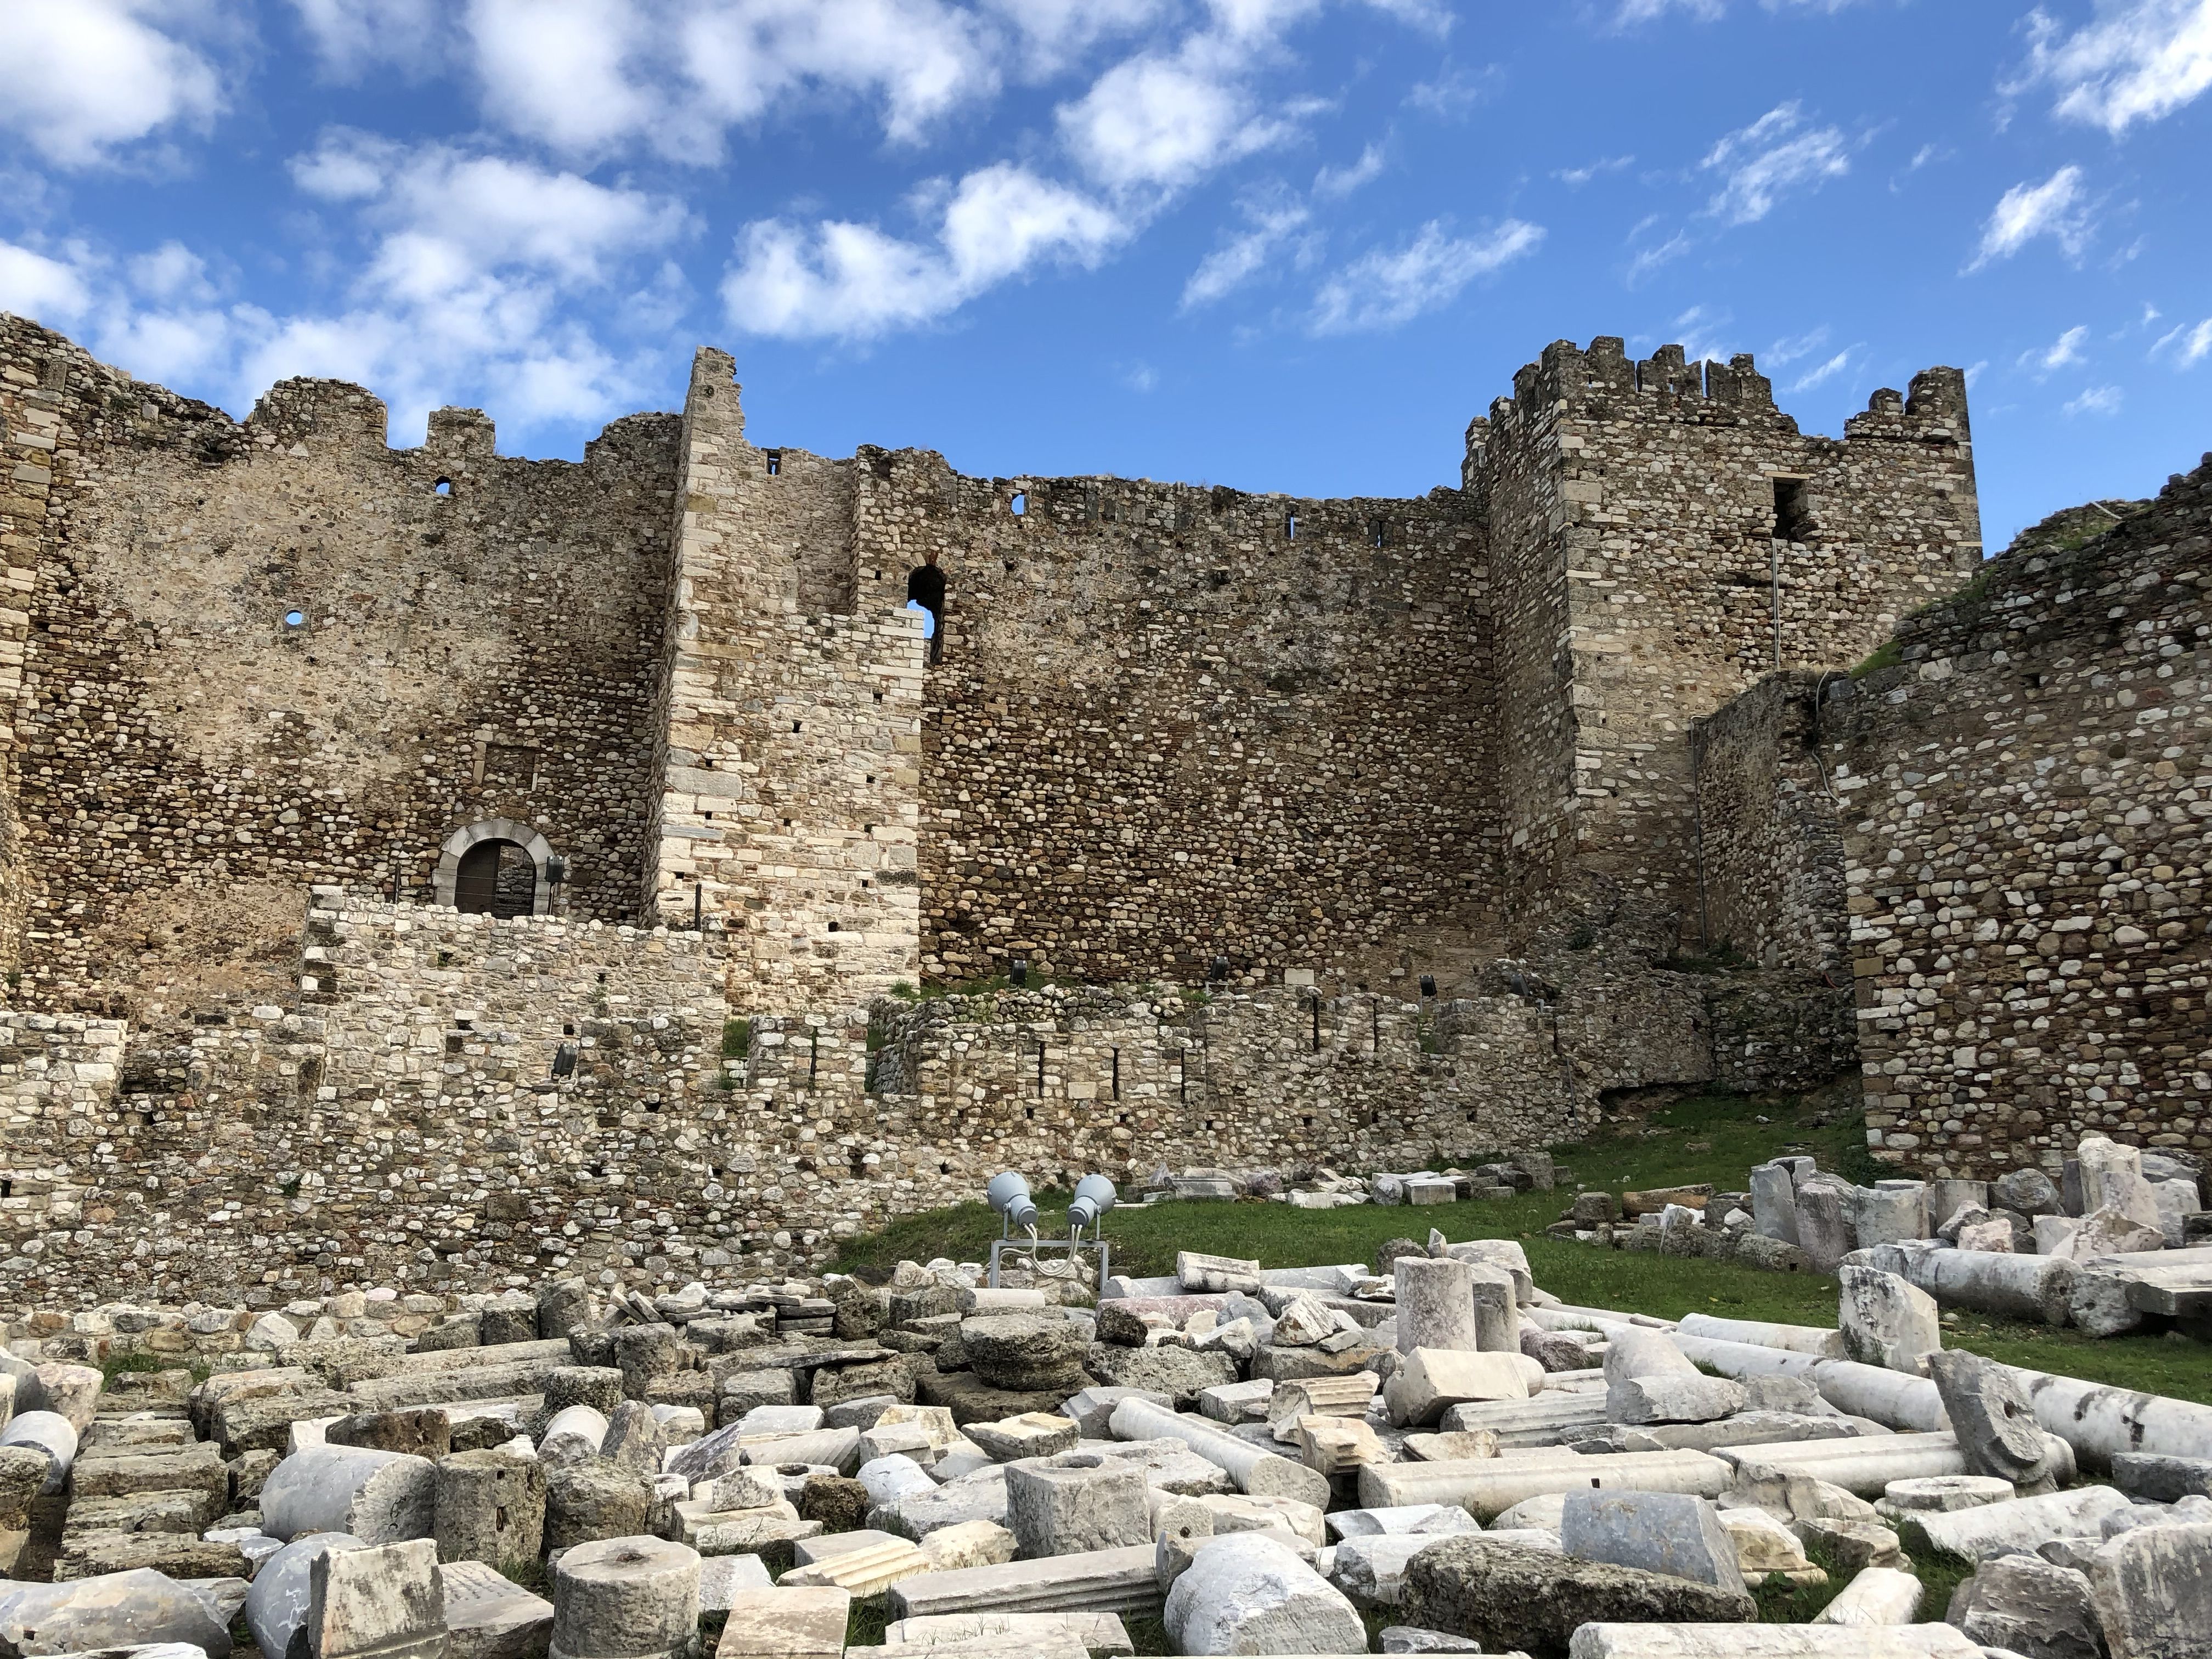 Inside the castle, only the outside walls are standing  and the crenellations on top of the walls are clear. There are small windows and archways, and the remains of some stonework on the ground.